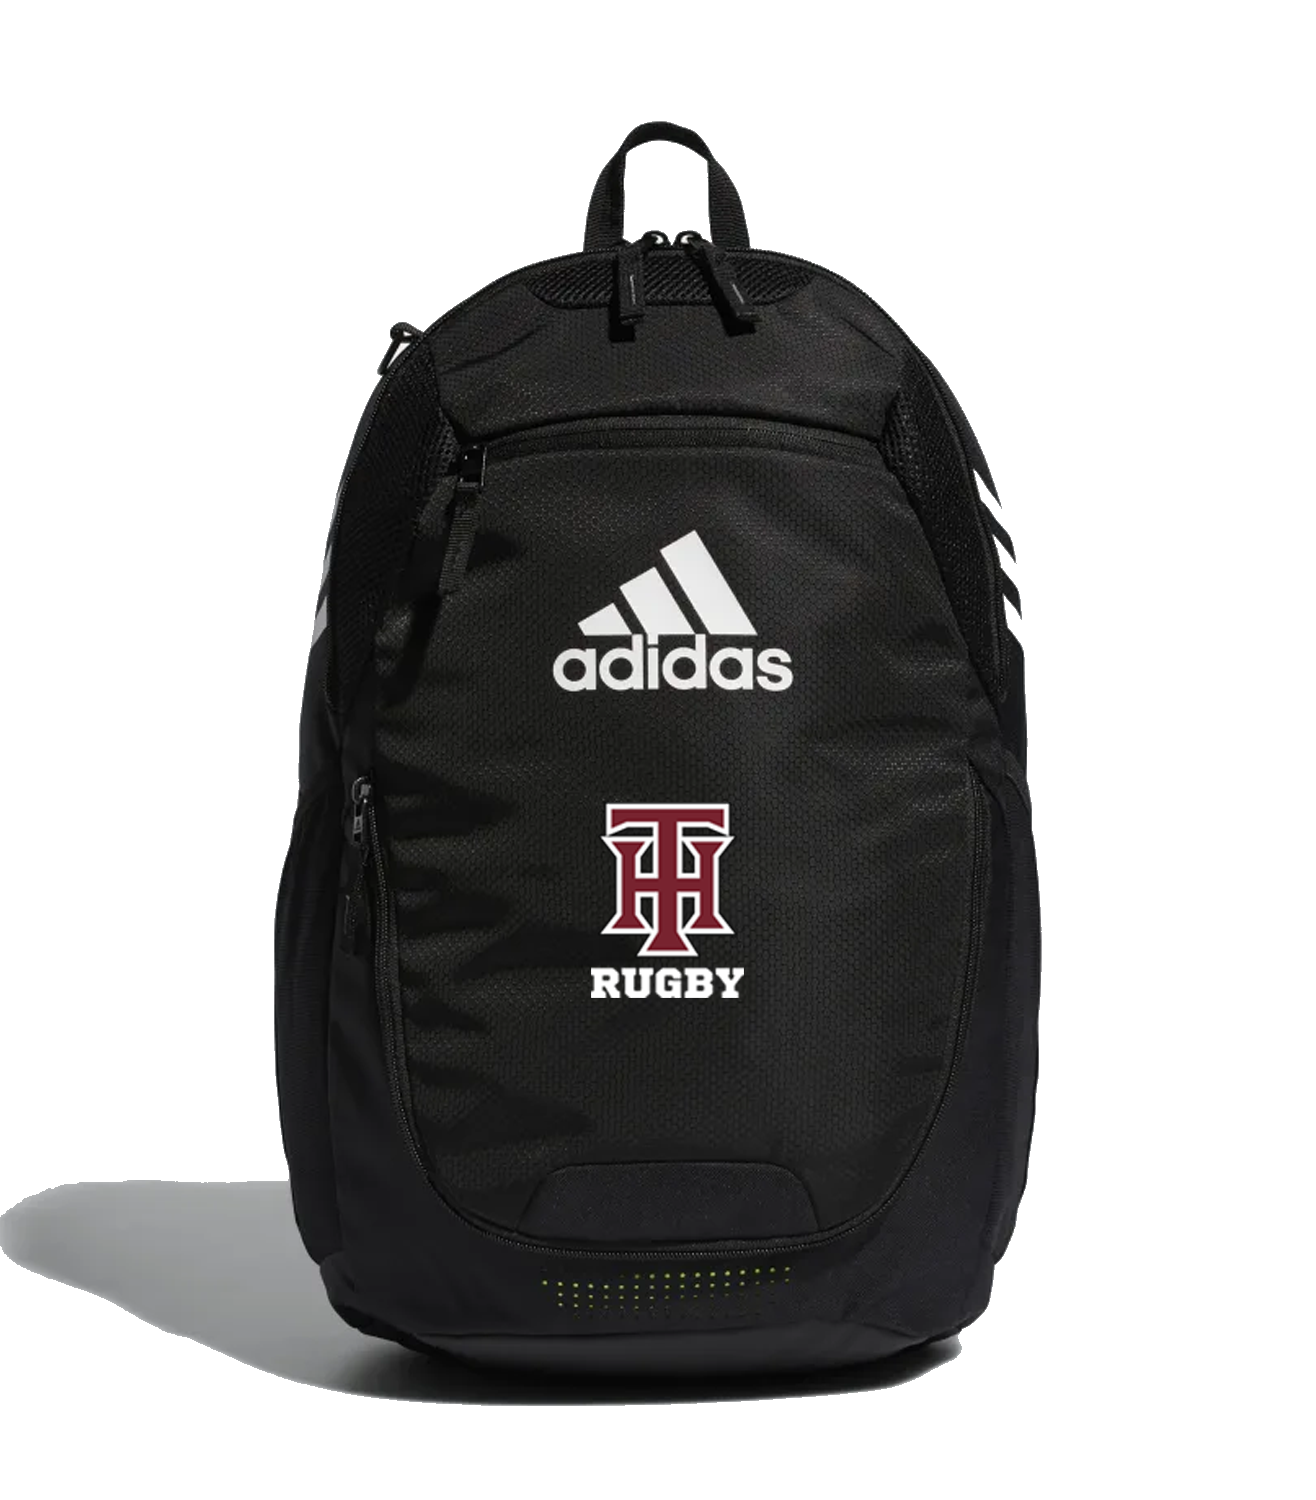 HTHS RUGBY ADIDAS BACKPACK